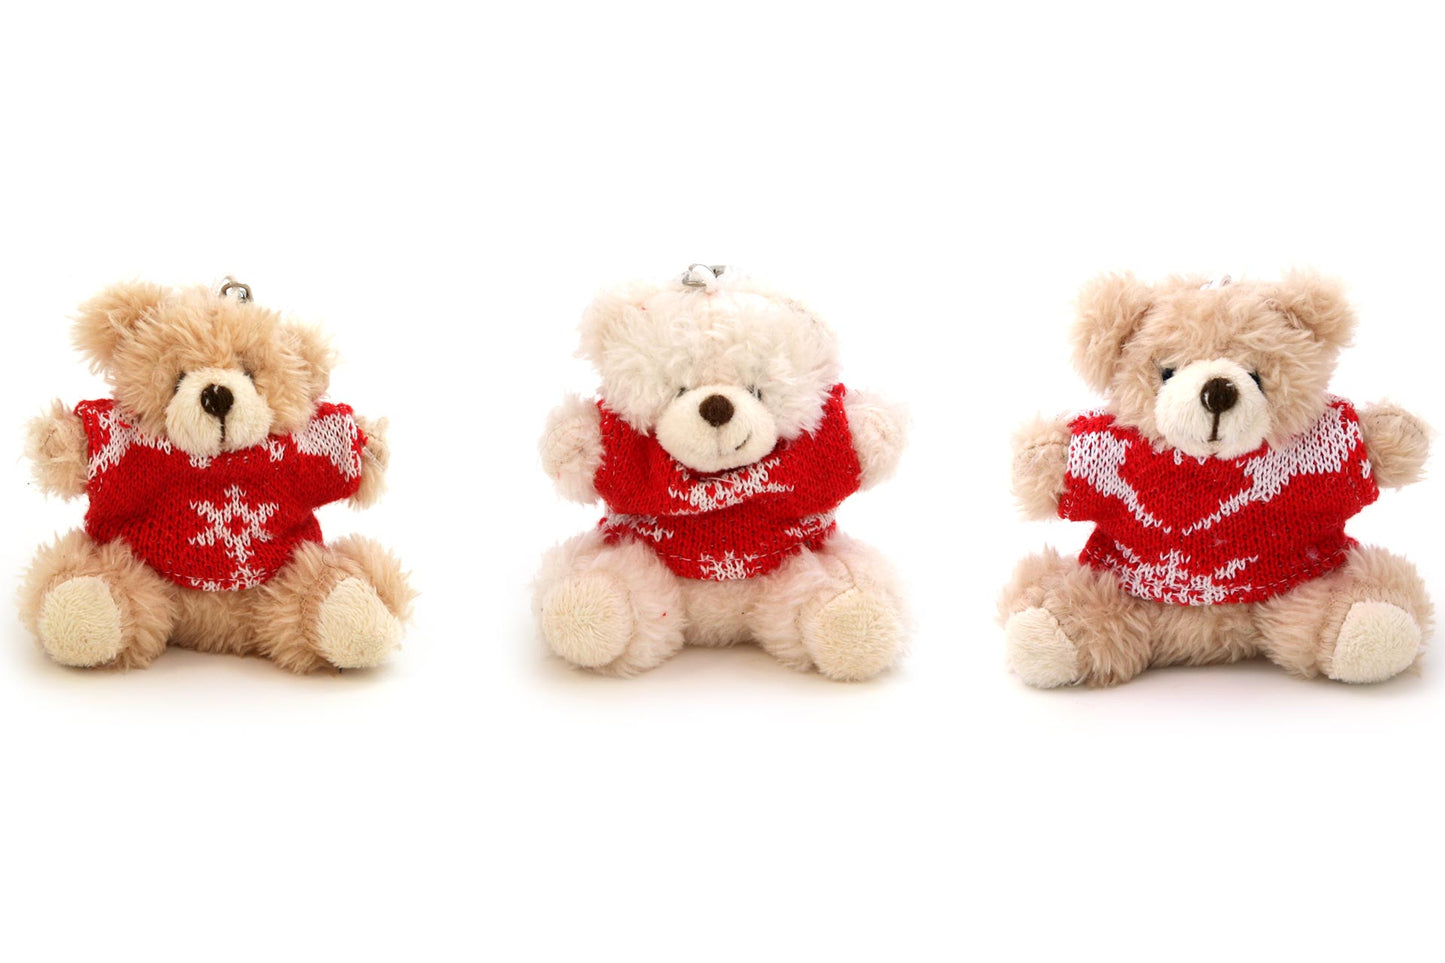 Fluffy Teddy Bears (Jumpers) Christmas Crackers (6 x 13-inch Crackers)